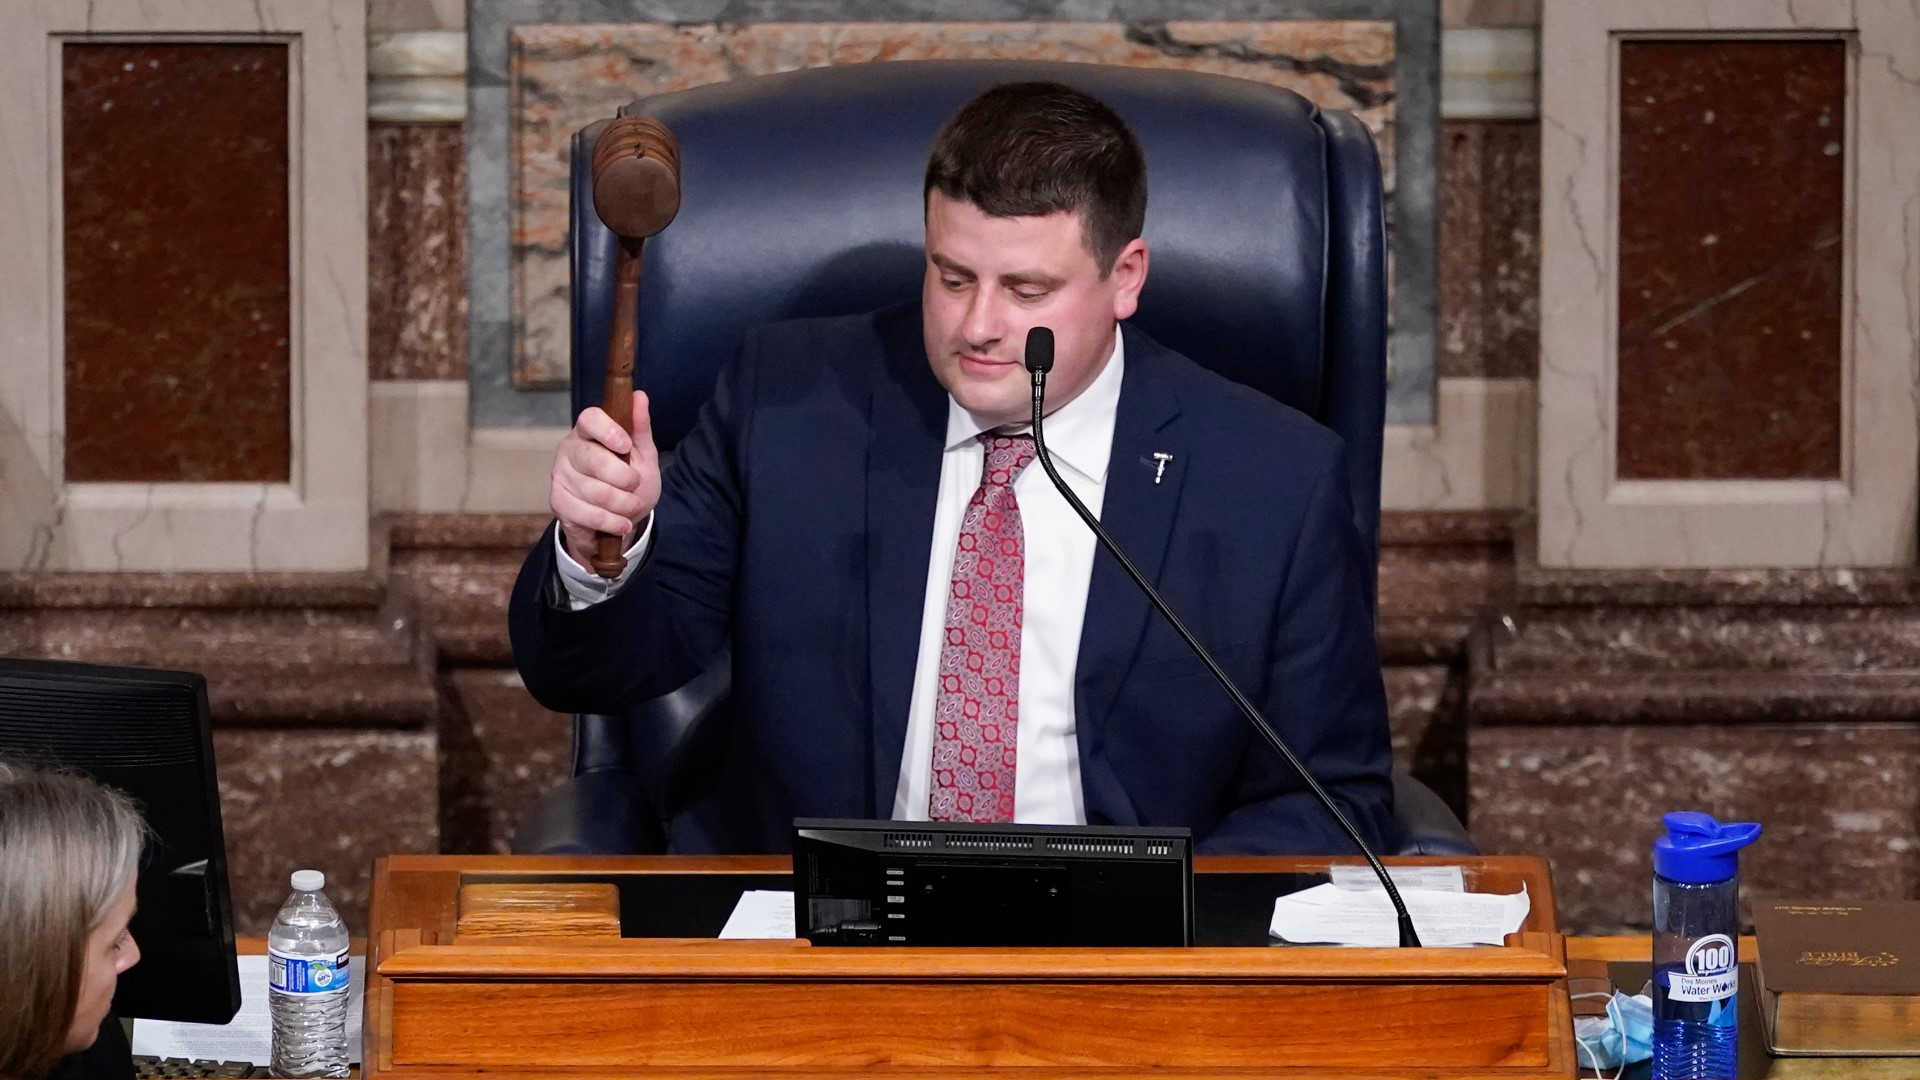 Getting bills passed in the Iowa legislature comes down to who's in charge.